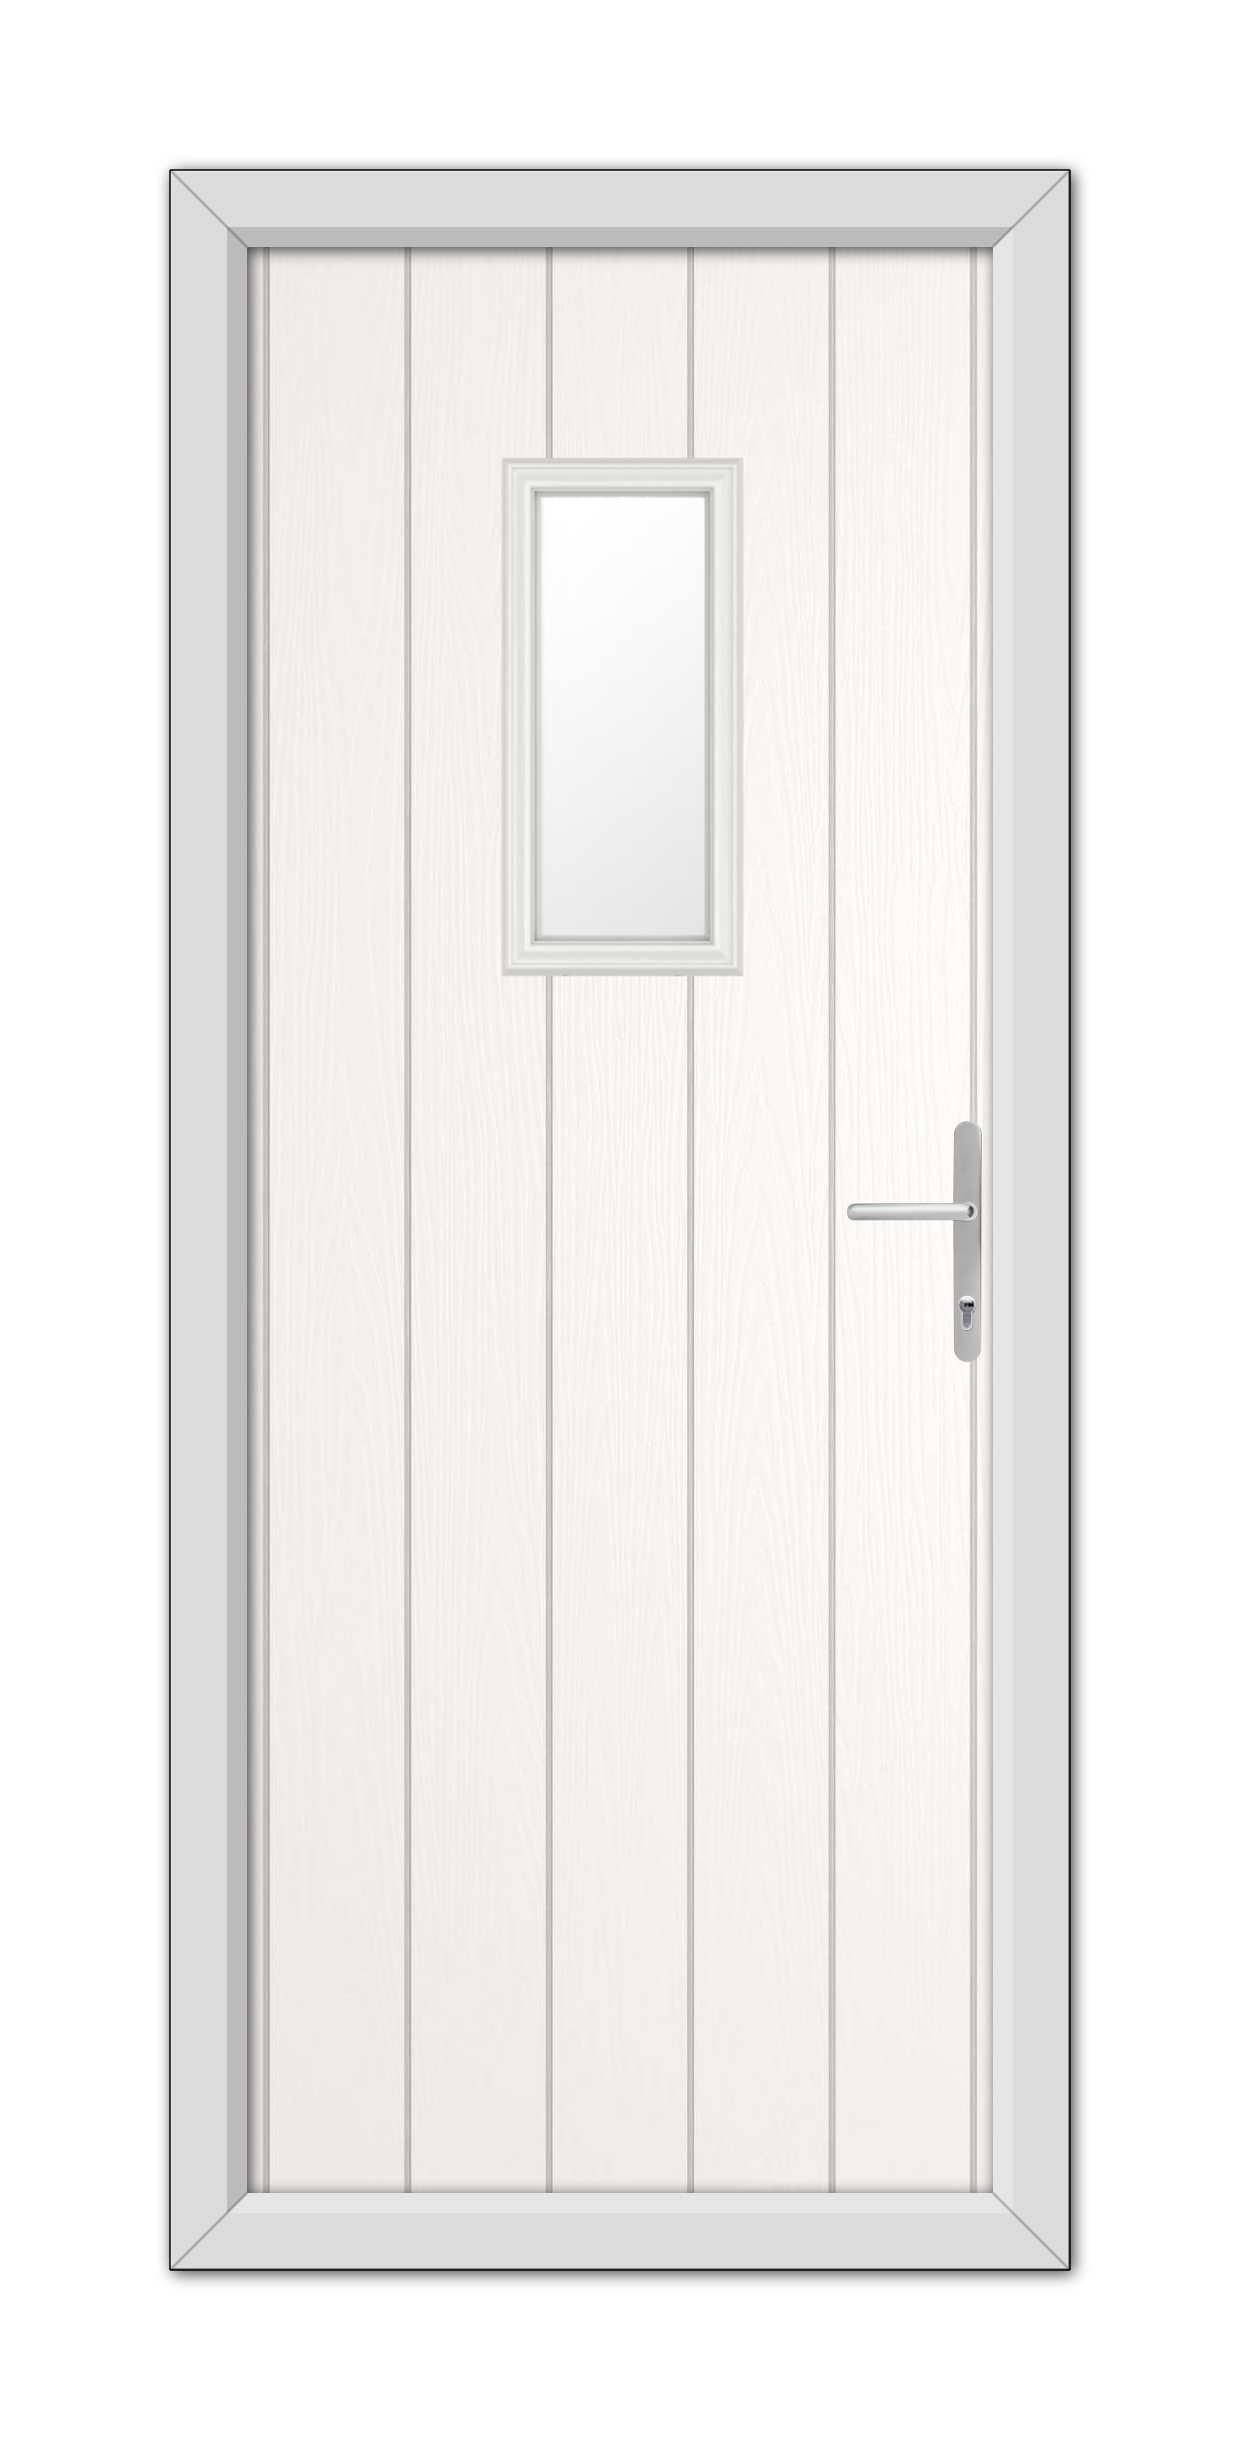 A modern, White Somerset Composite Door 48mm Timber Core with a small, centered rectangular window, equipped with a metallic handle, set in a simple frame.